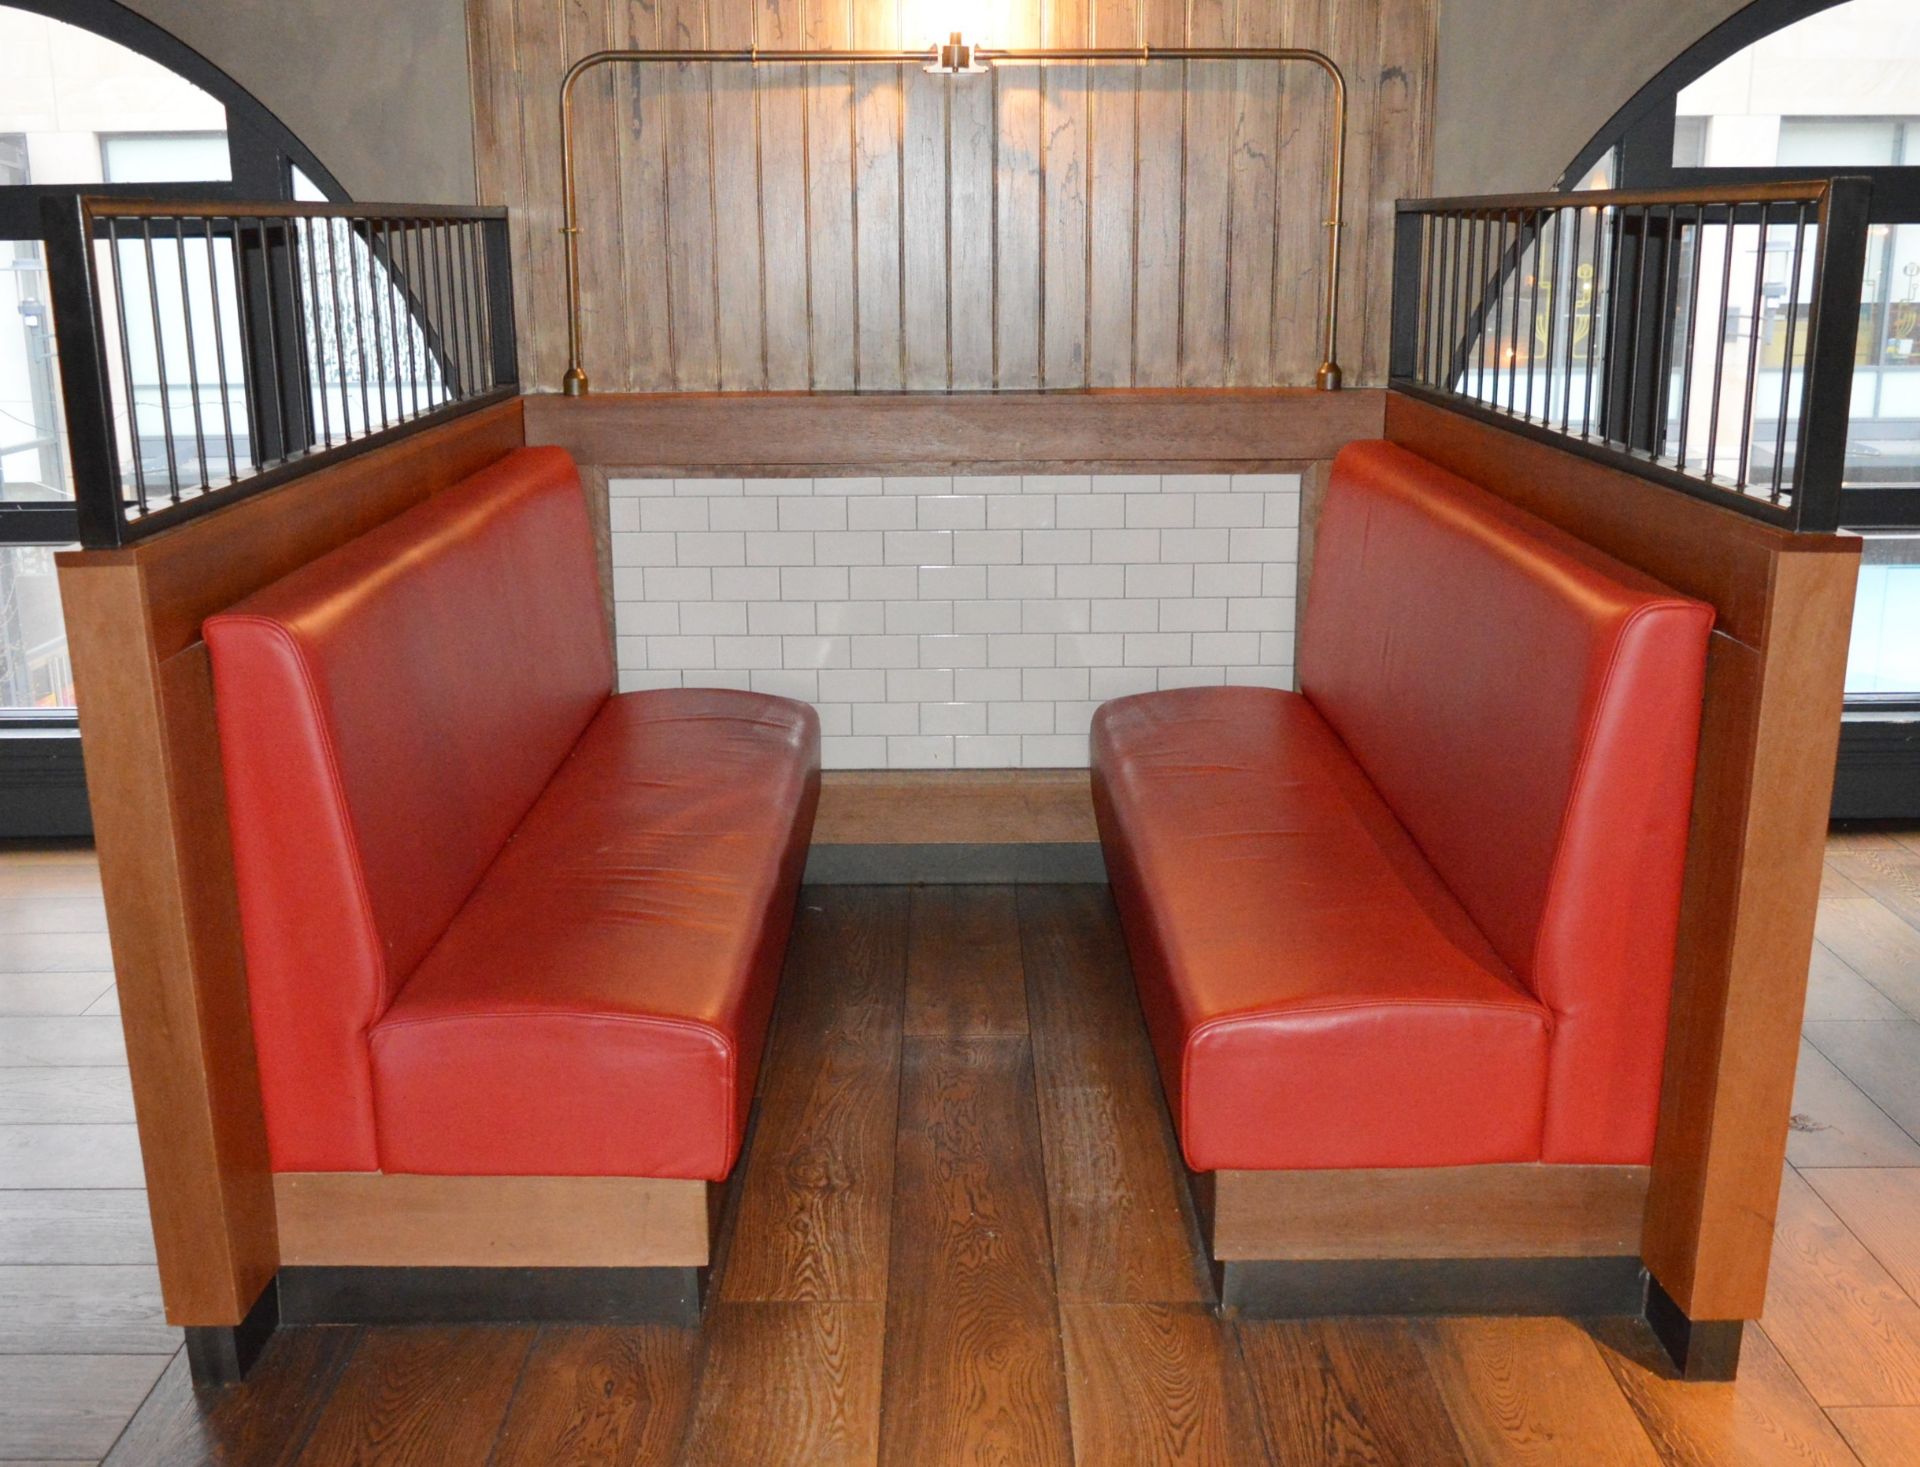 1 x Contemporary Seating Booth Upholstered in Red Leather